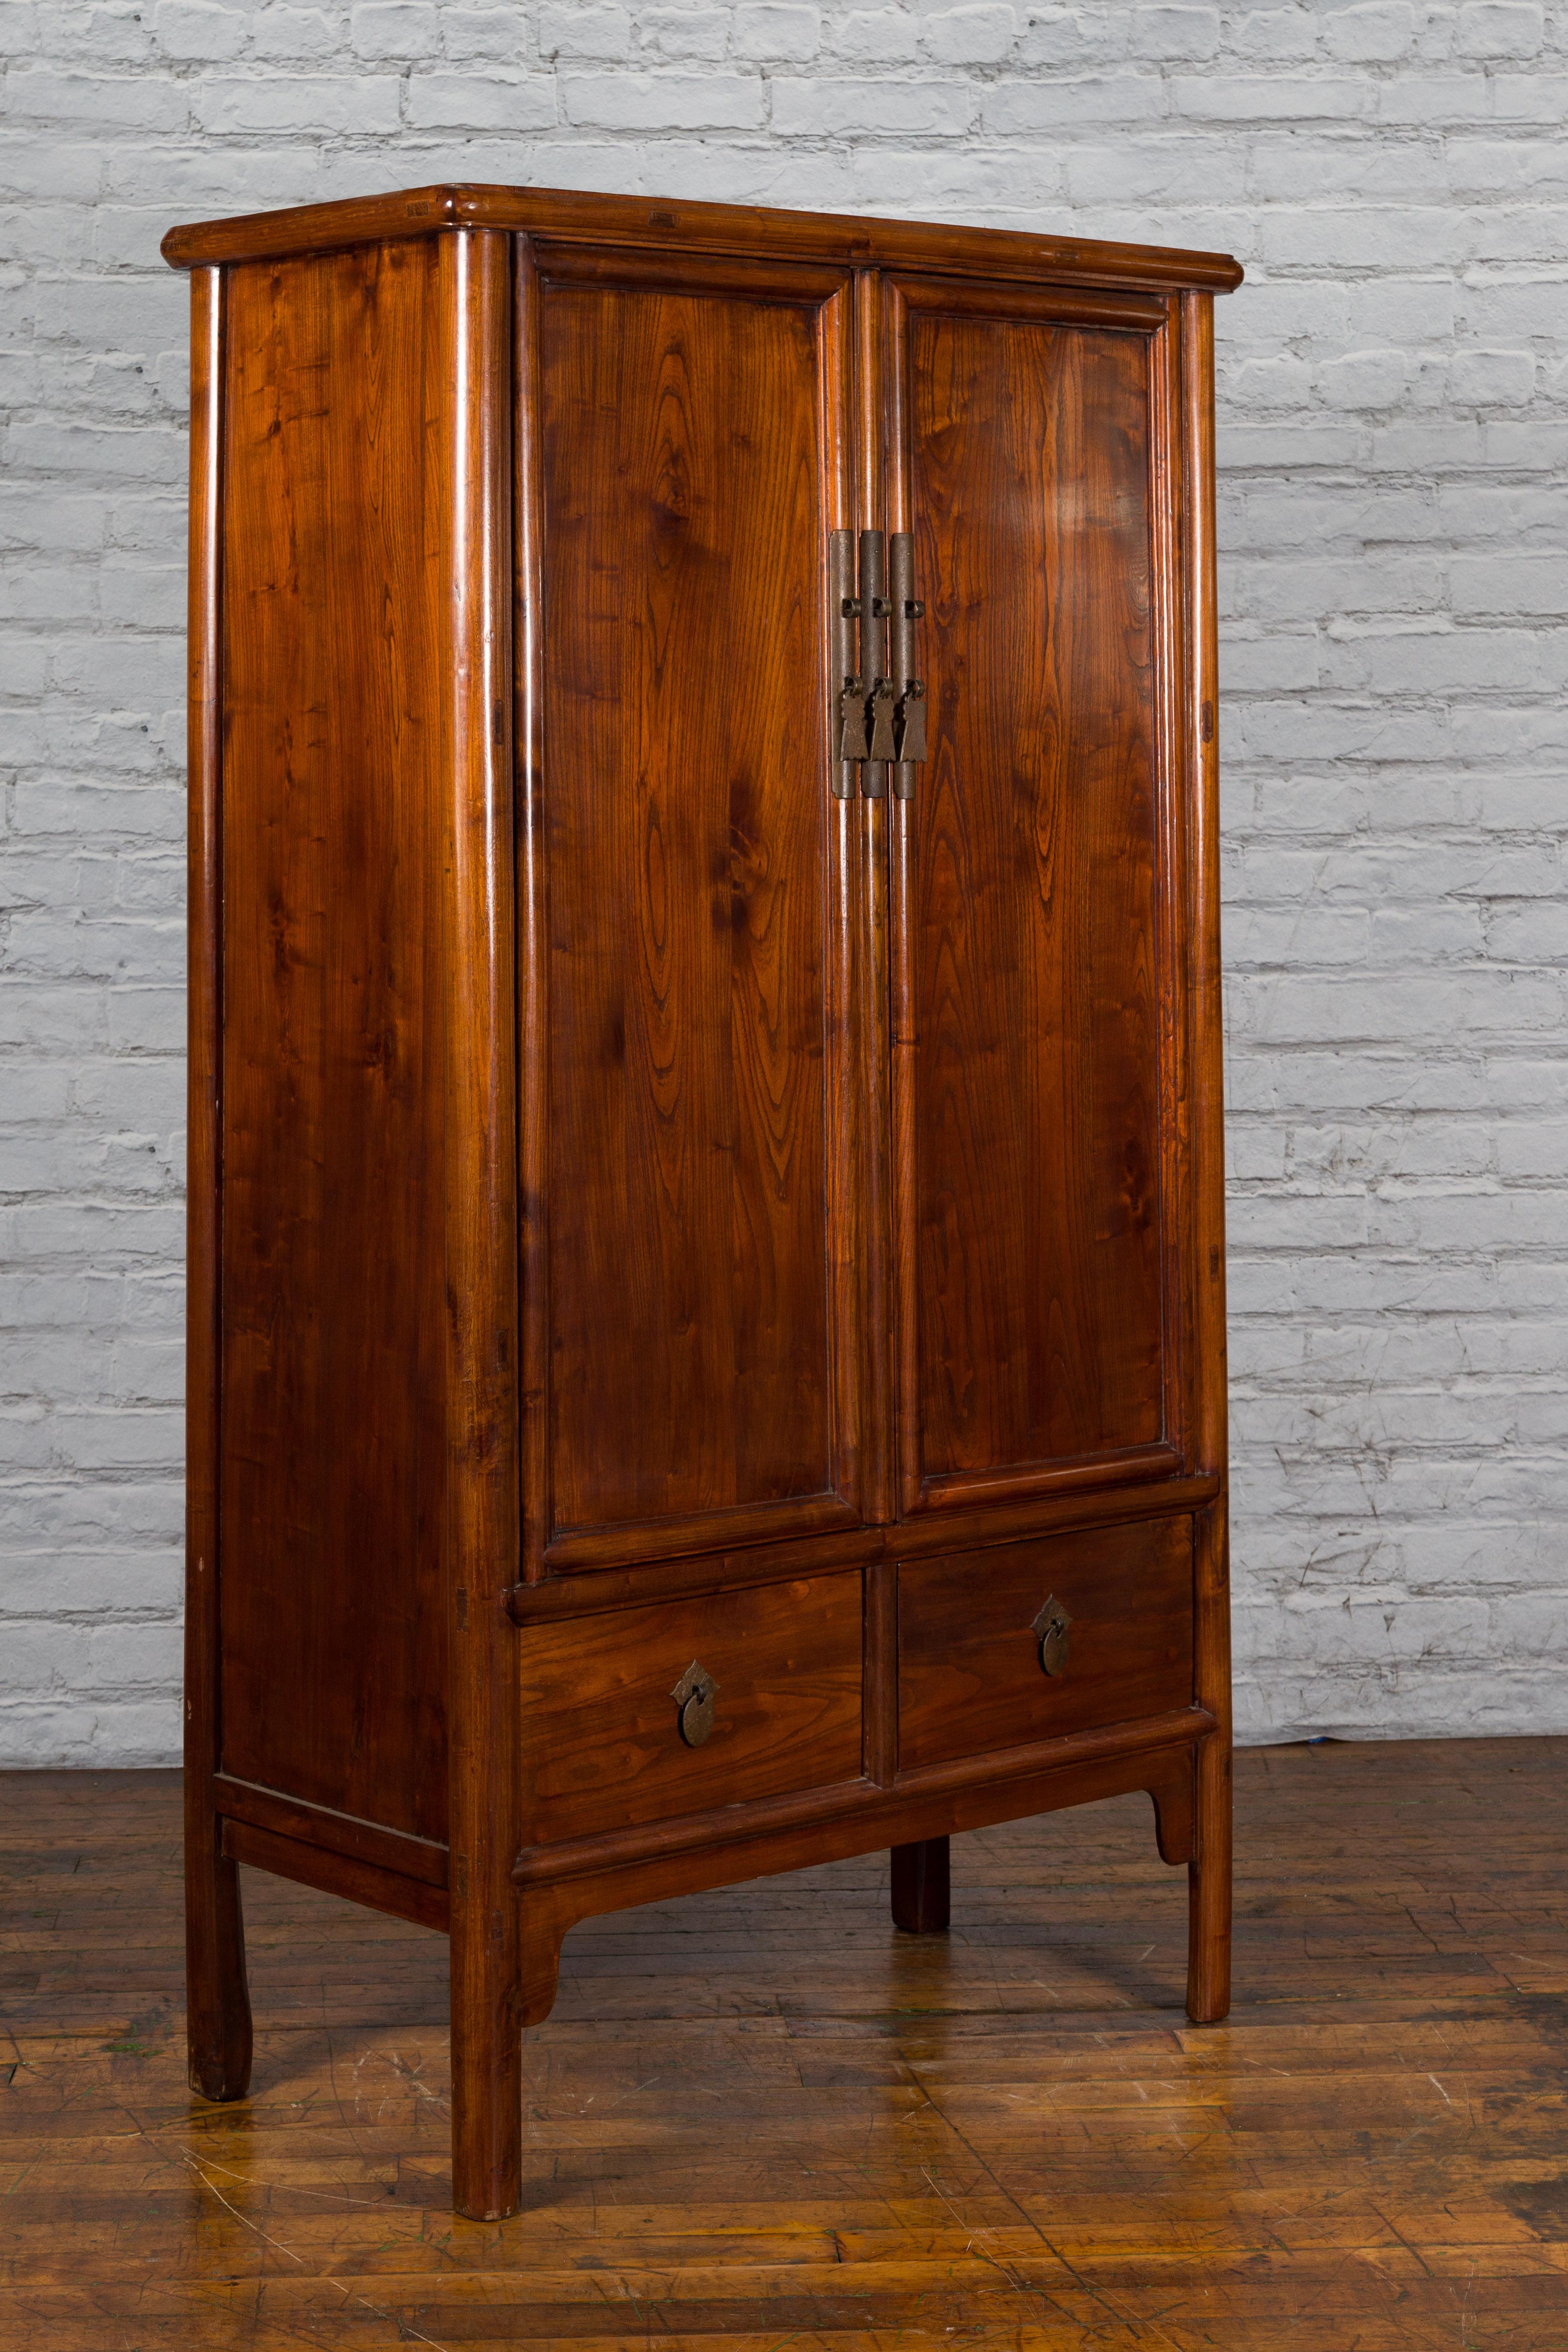 Chinese 19th Century Qing Dynasty Period Elmwood Cabinet with Doors and Drawers In Good Condition For Sale In Yonkers, NY